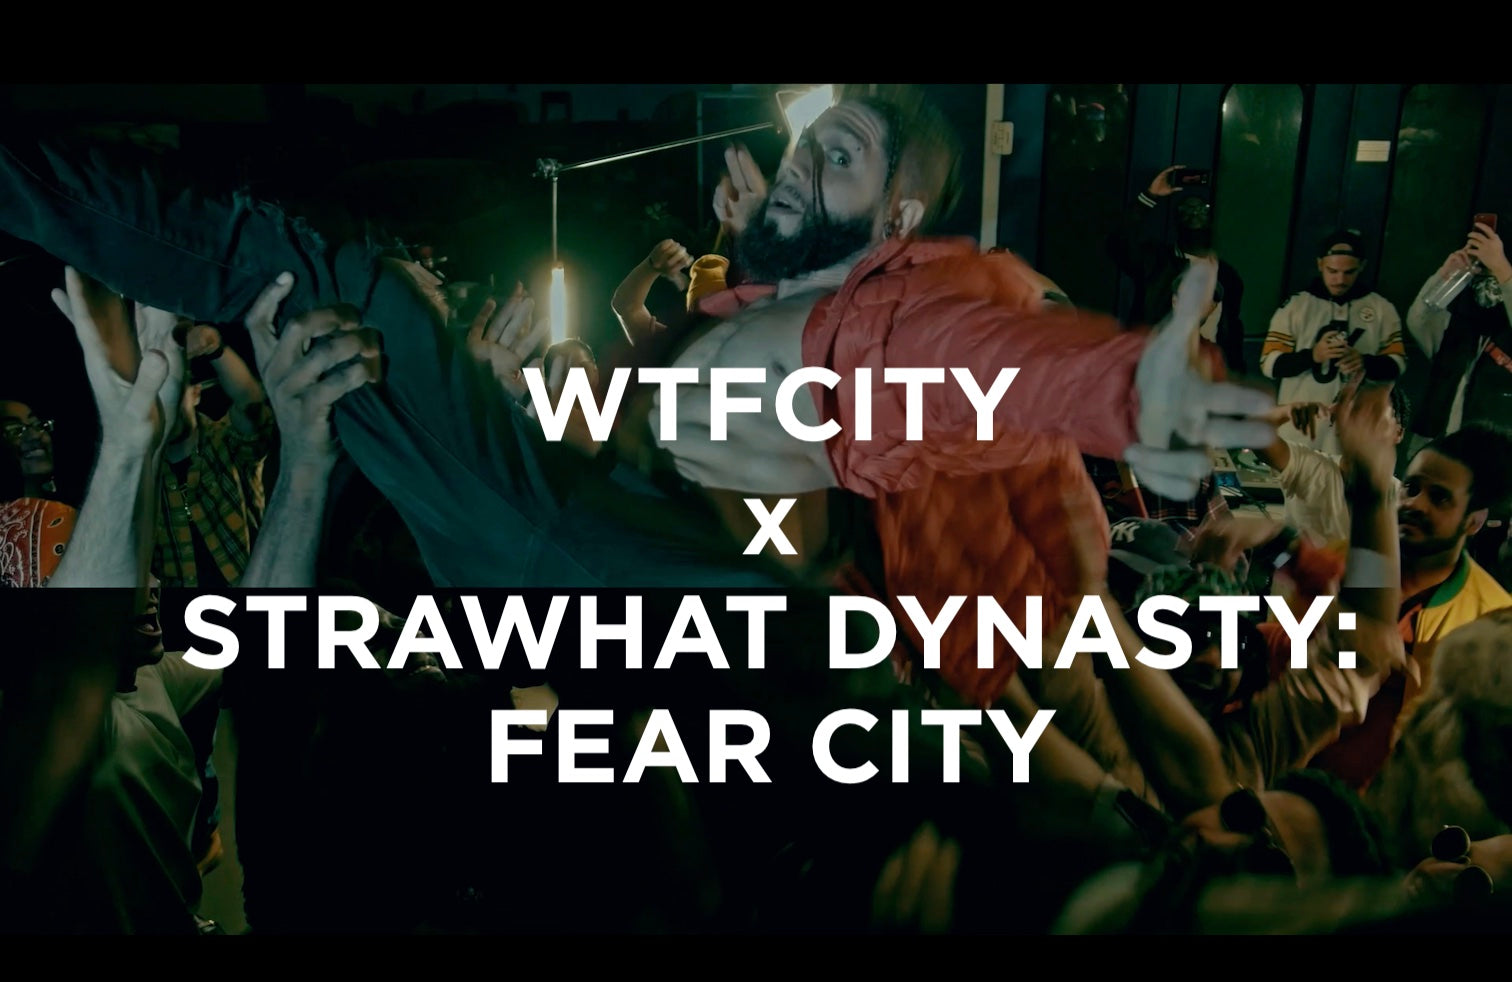 Load video: Fear City music video by Strawhat Dynasty